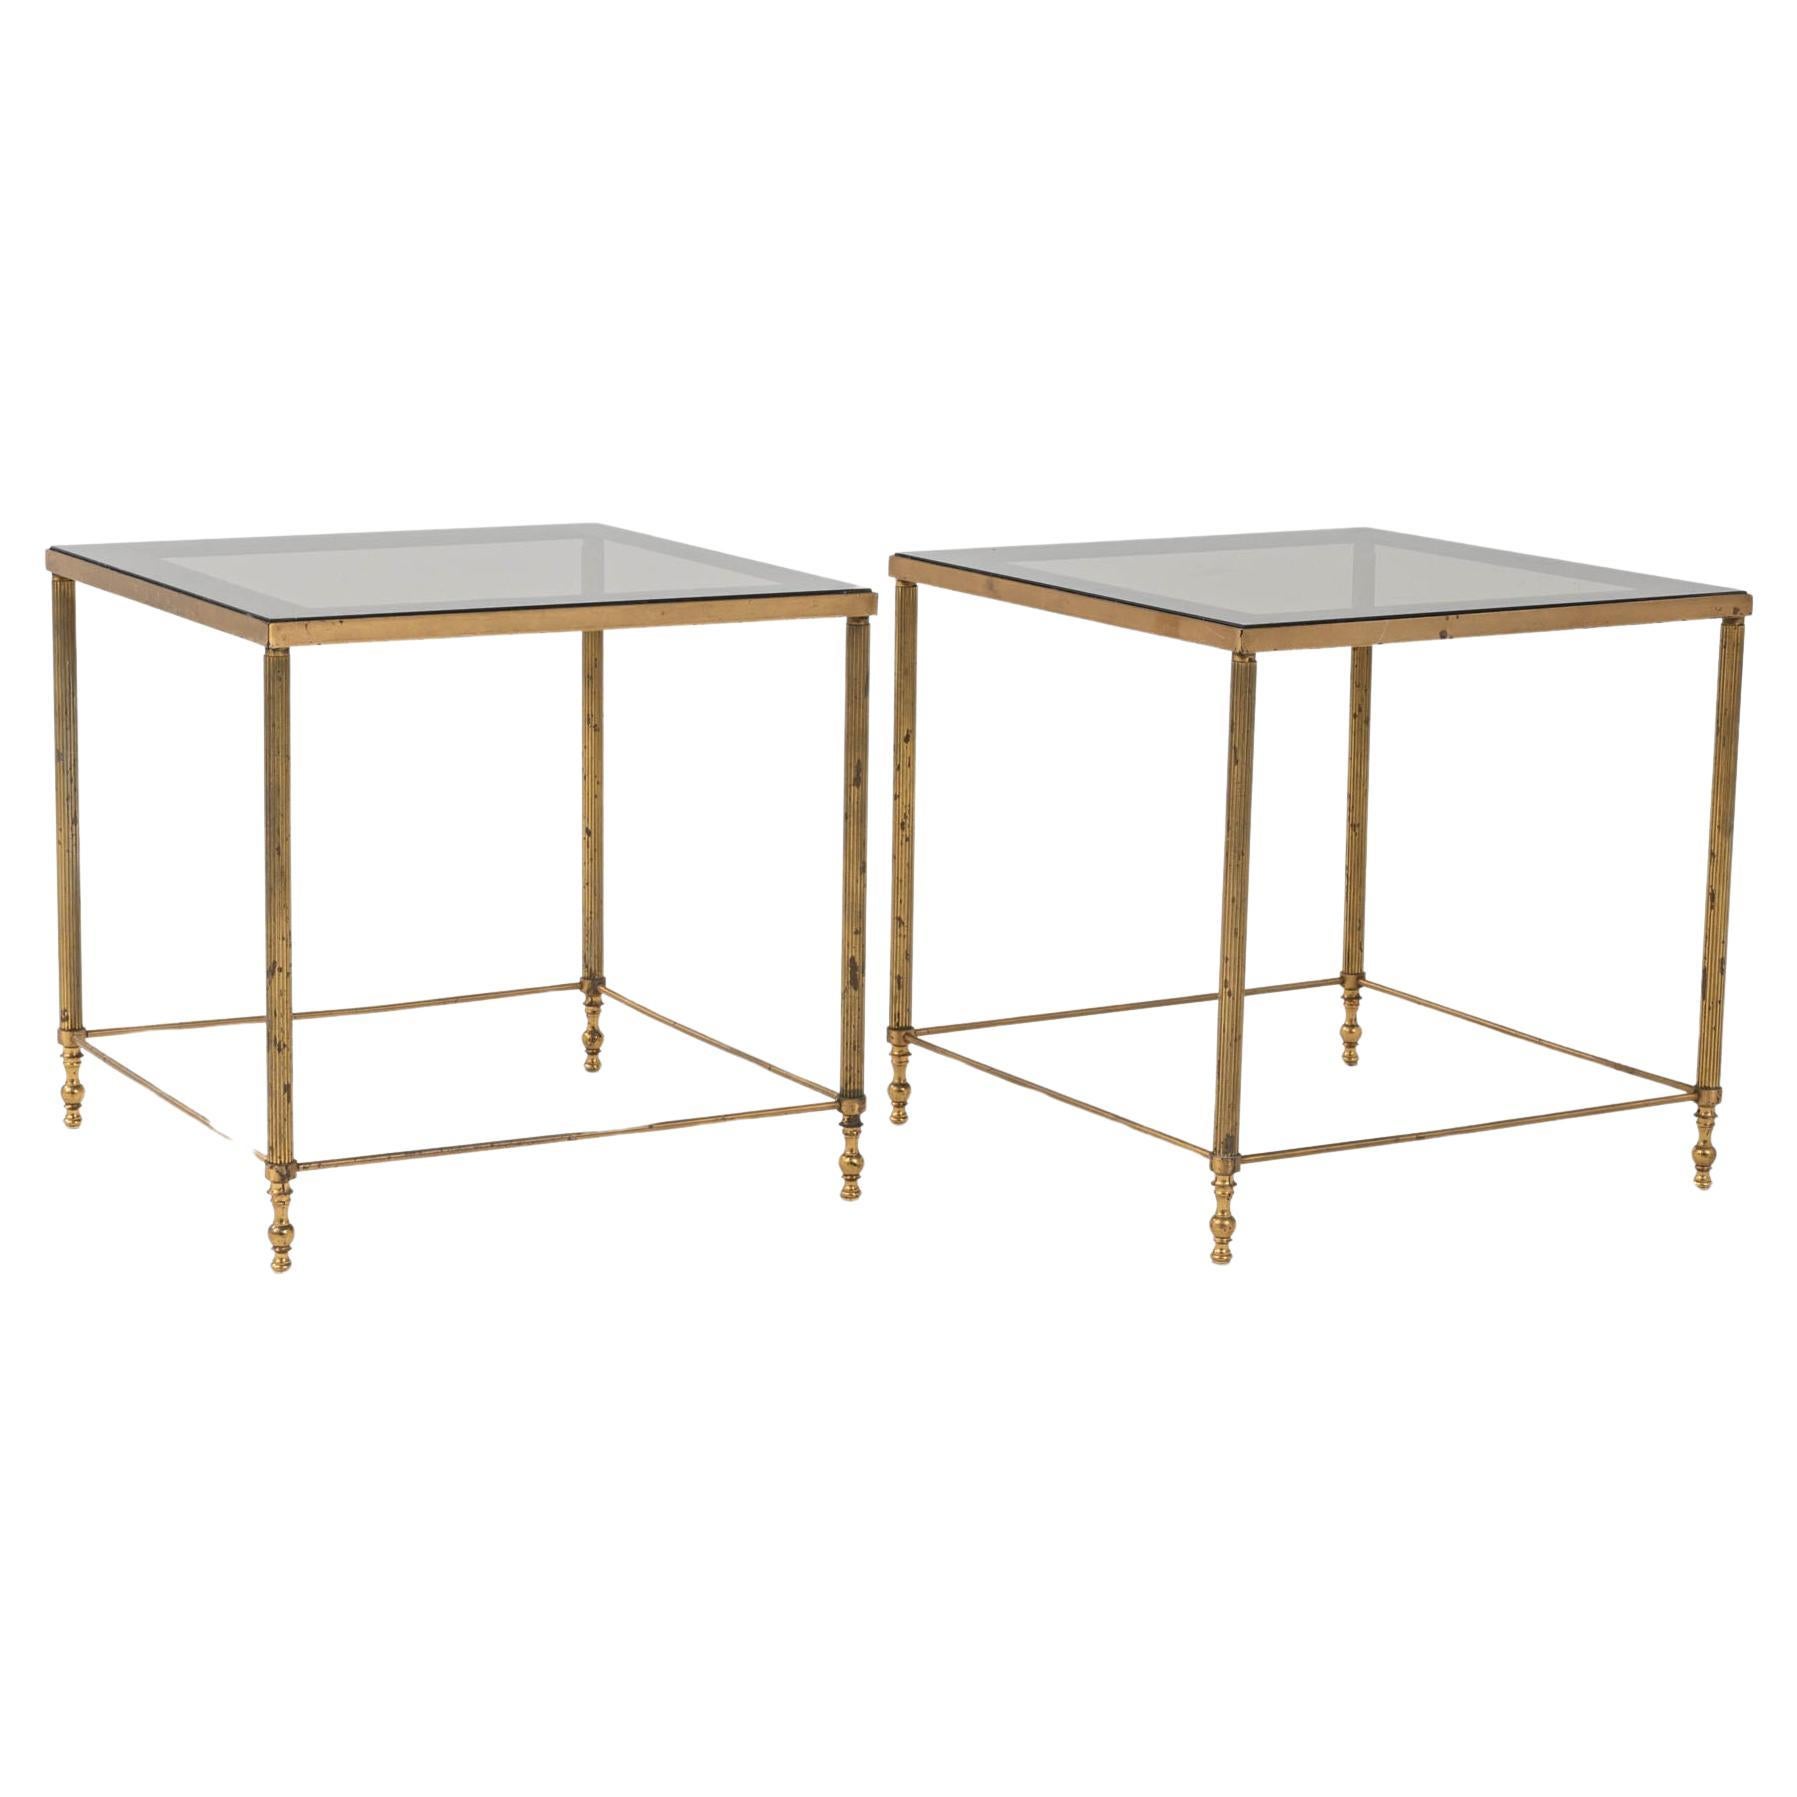 20th Century French Pair Of Brass Coffee Tables With Glass Tops By Maison Jansen For Sale